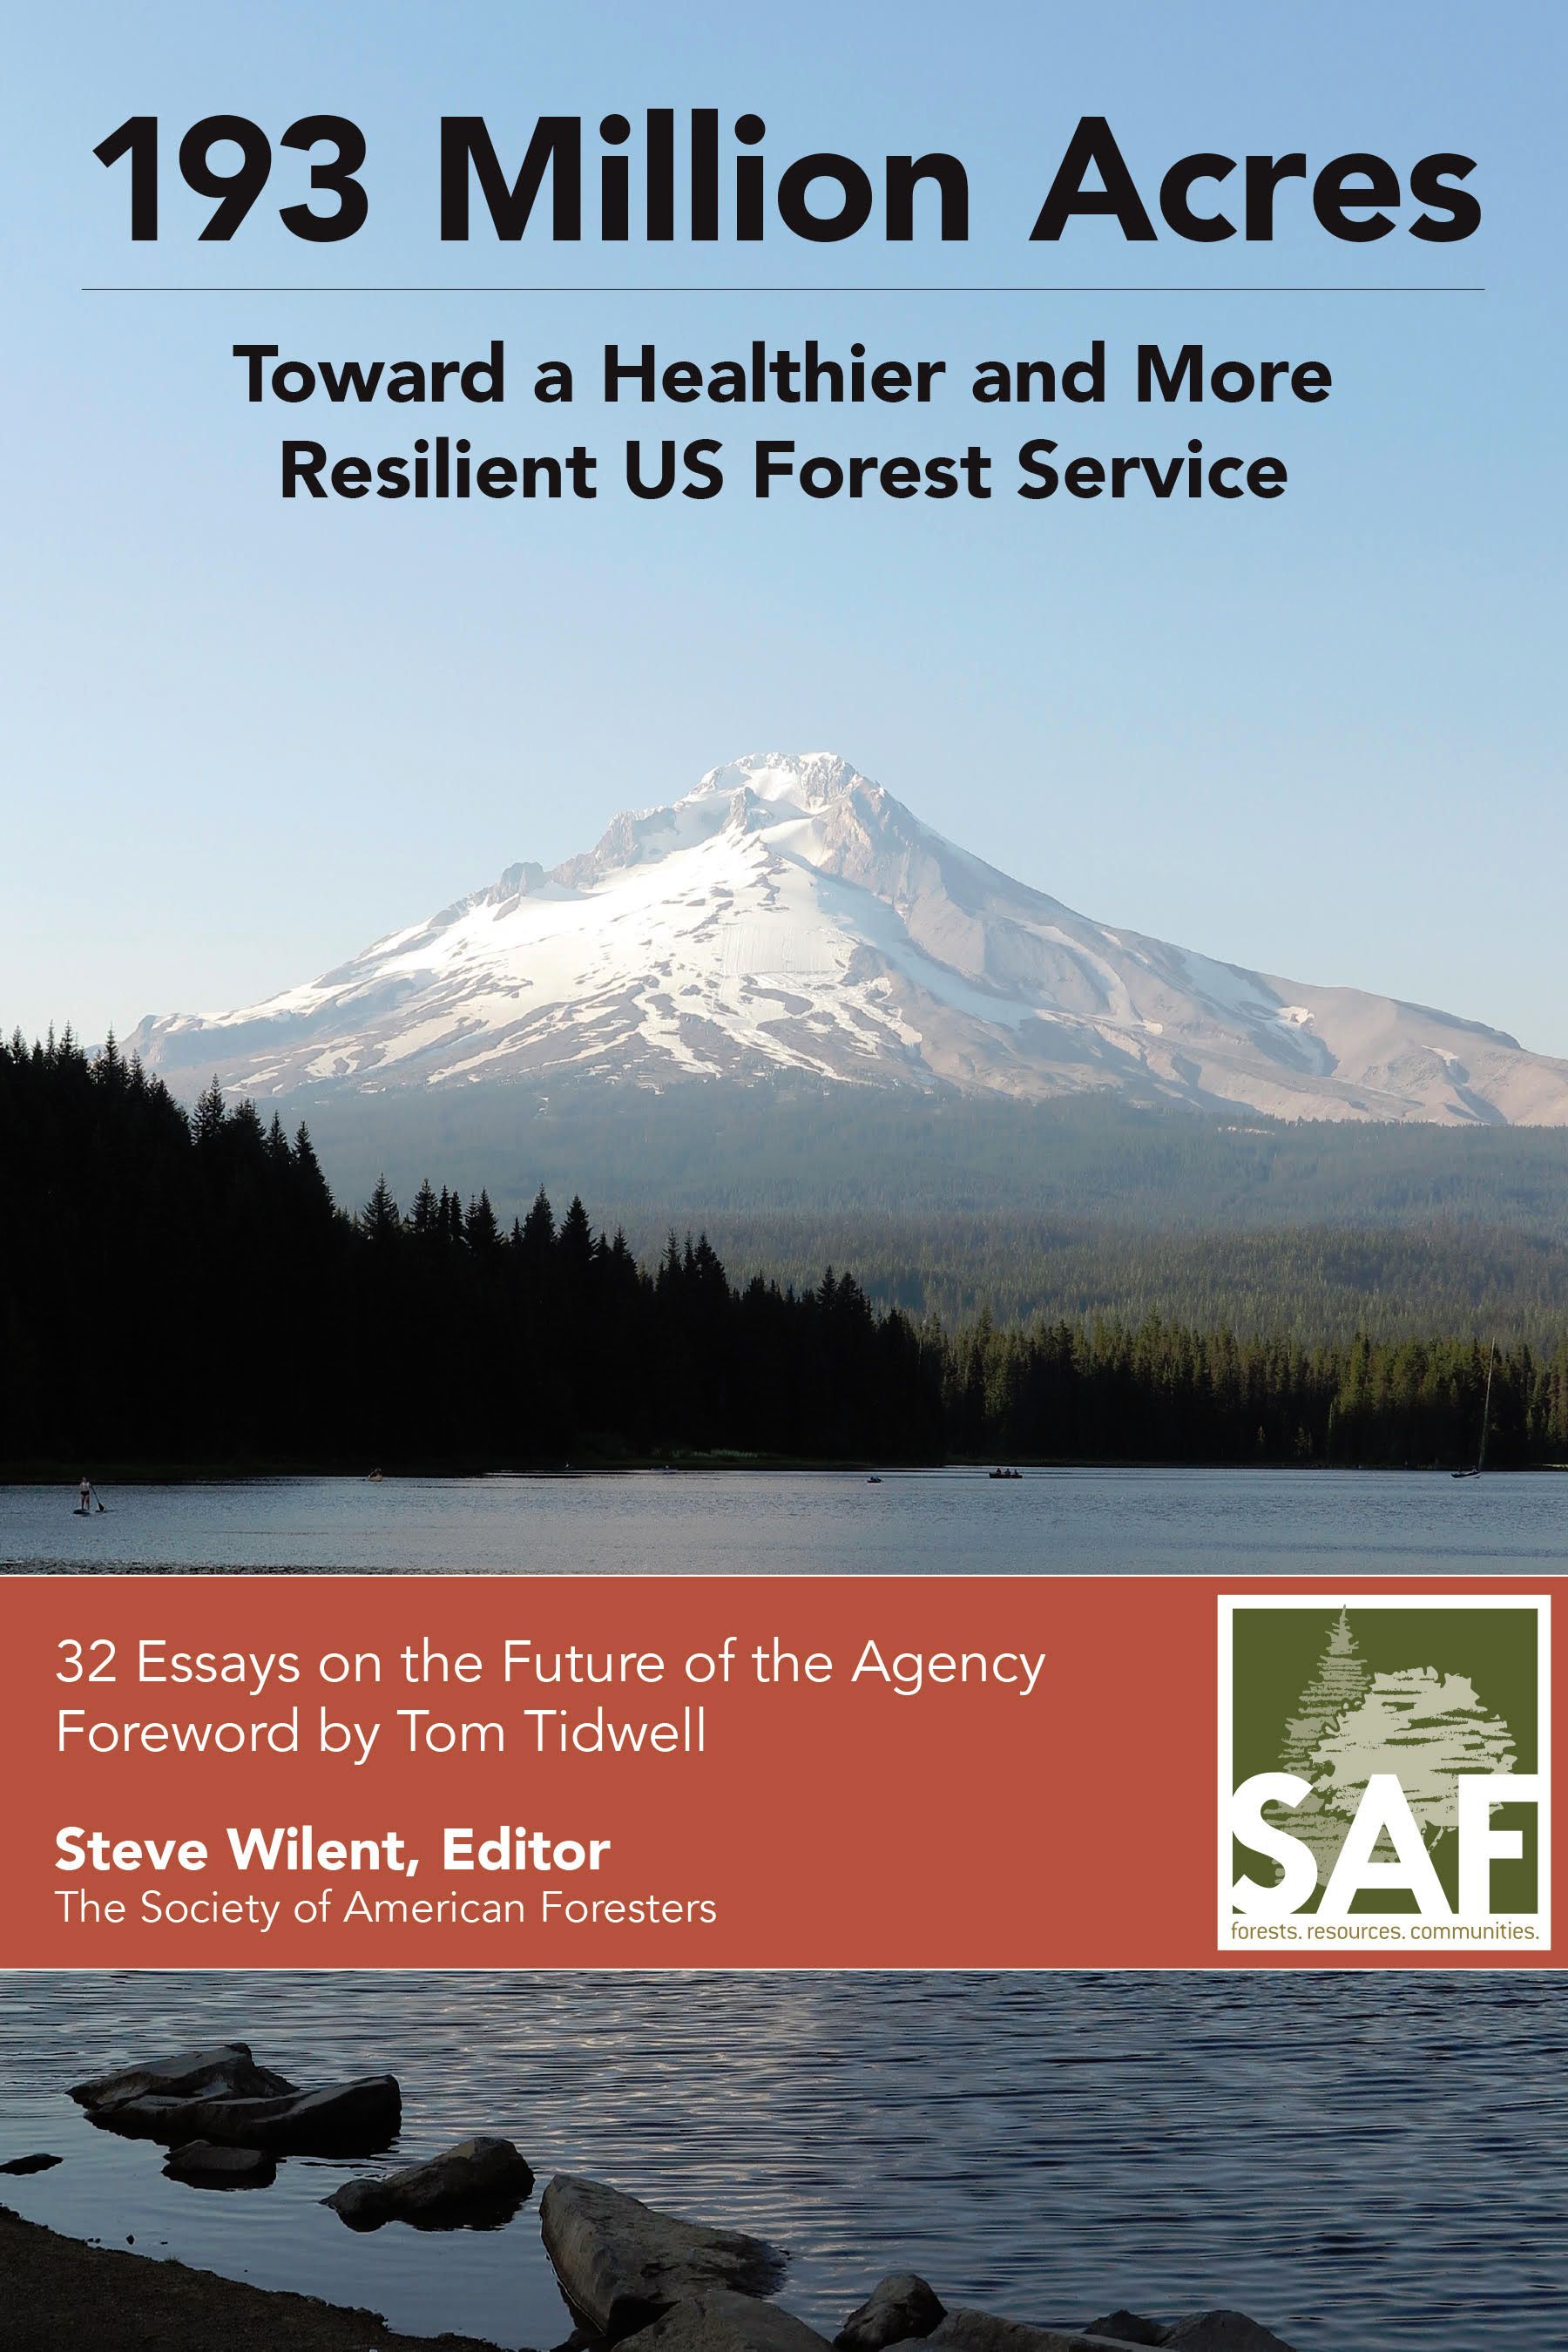 193 Million Acres: Toward a Healthier and More Resilient US